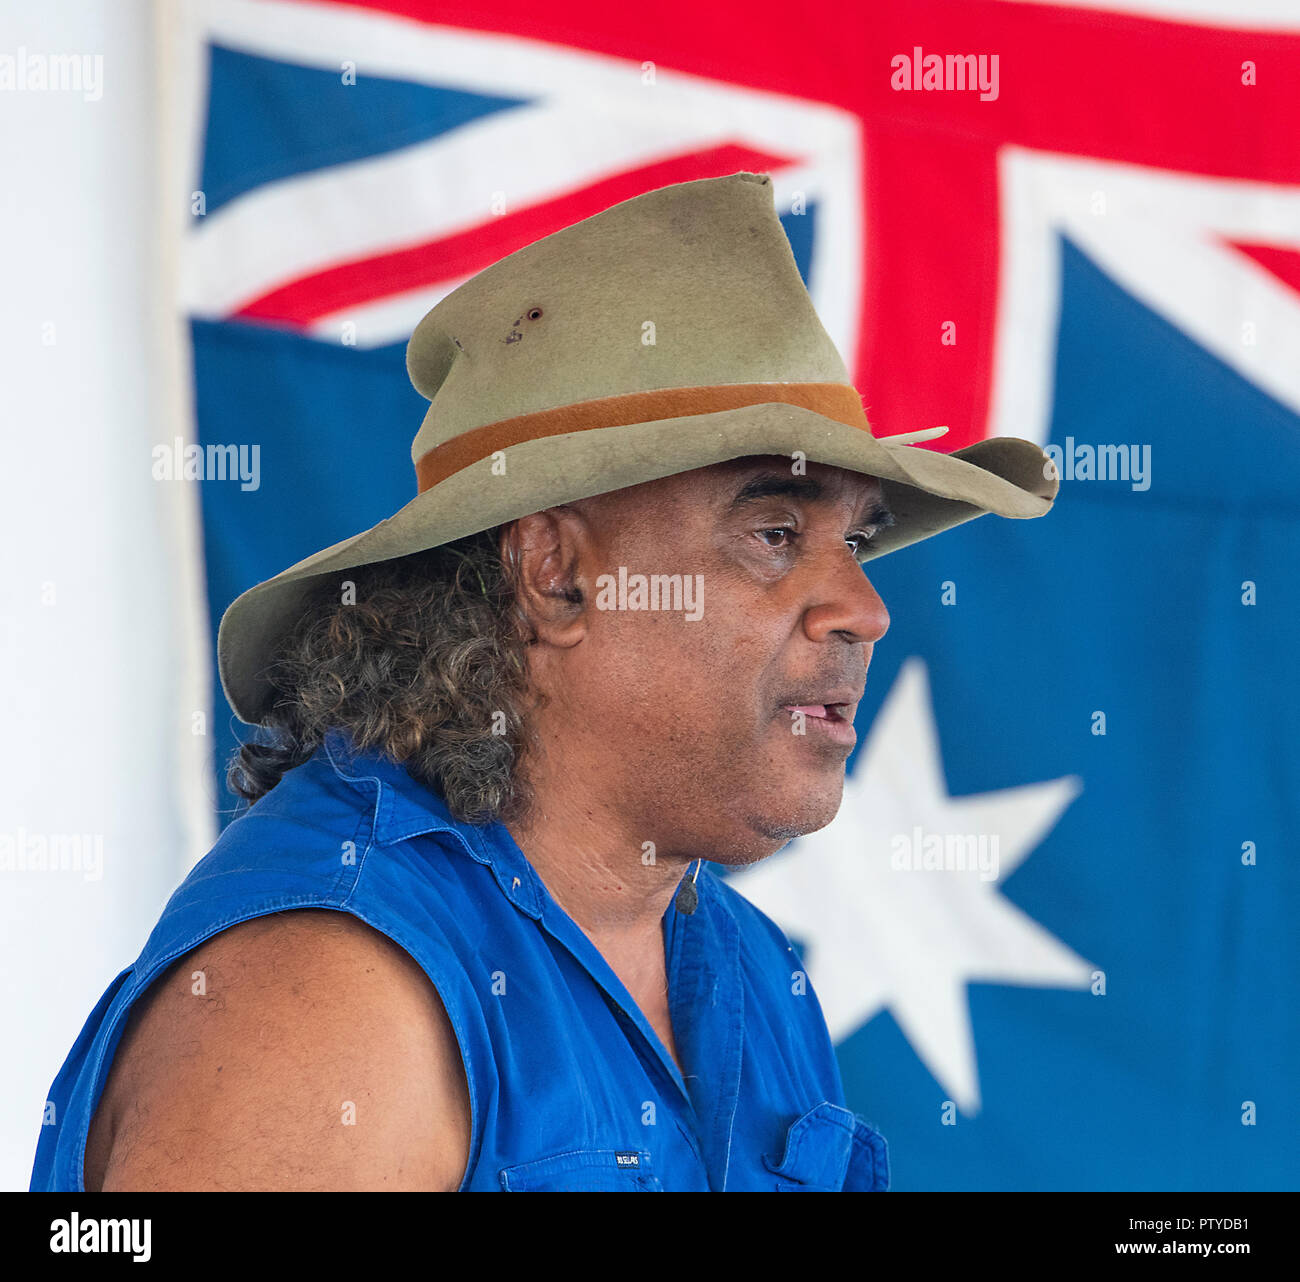 Portrait of David Hudson, an Aboriginal man, standing in front of the Australian flag performing at the Australian Camp Oven Festival 2018, Millmerran Stock Photo